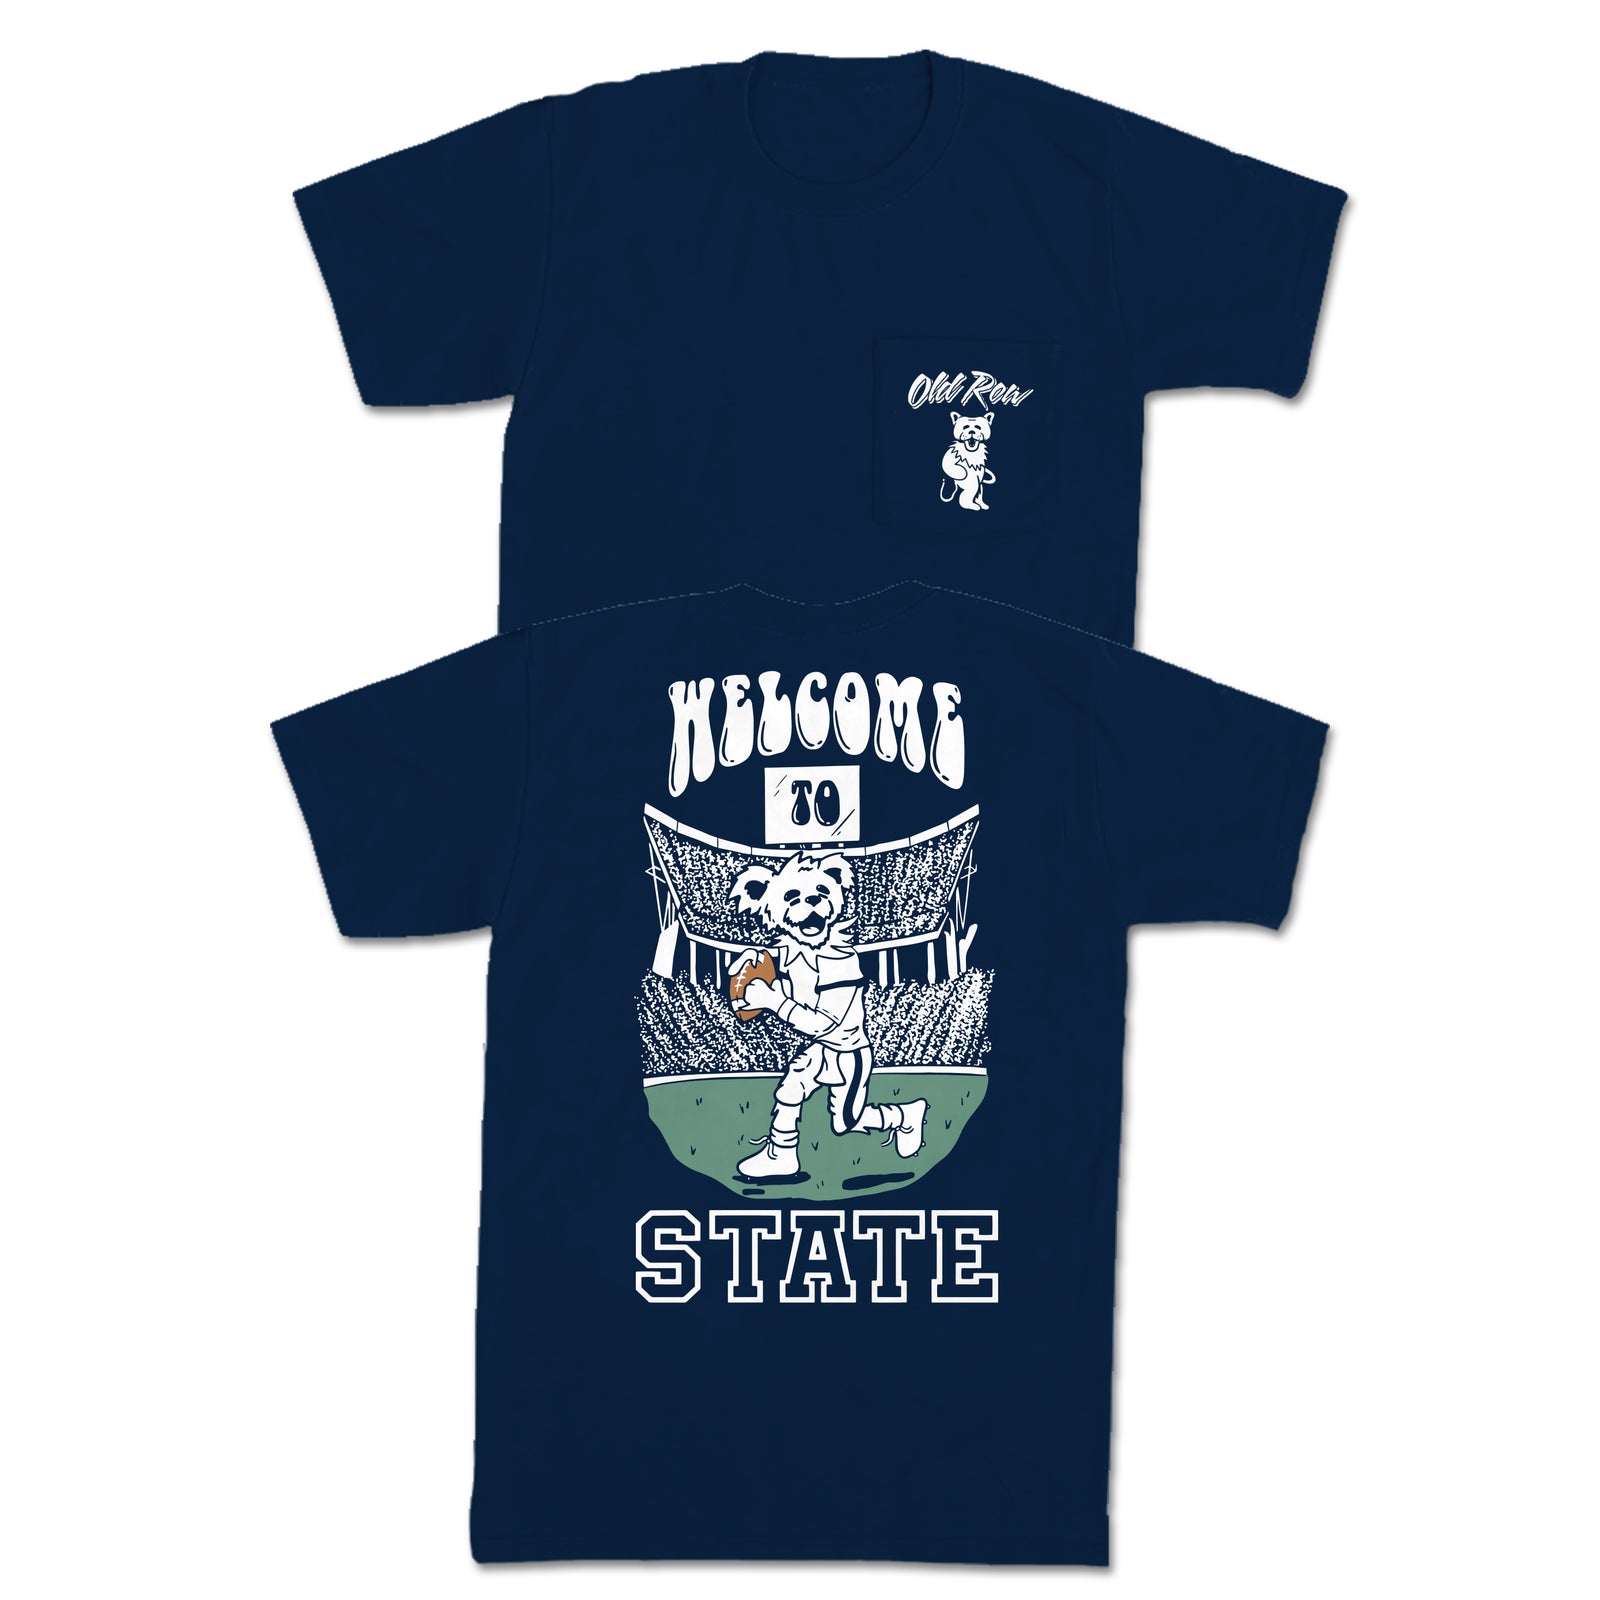 Welcome to State Pocket Tee